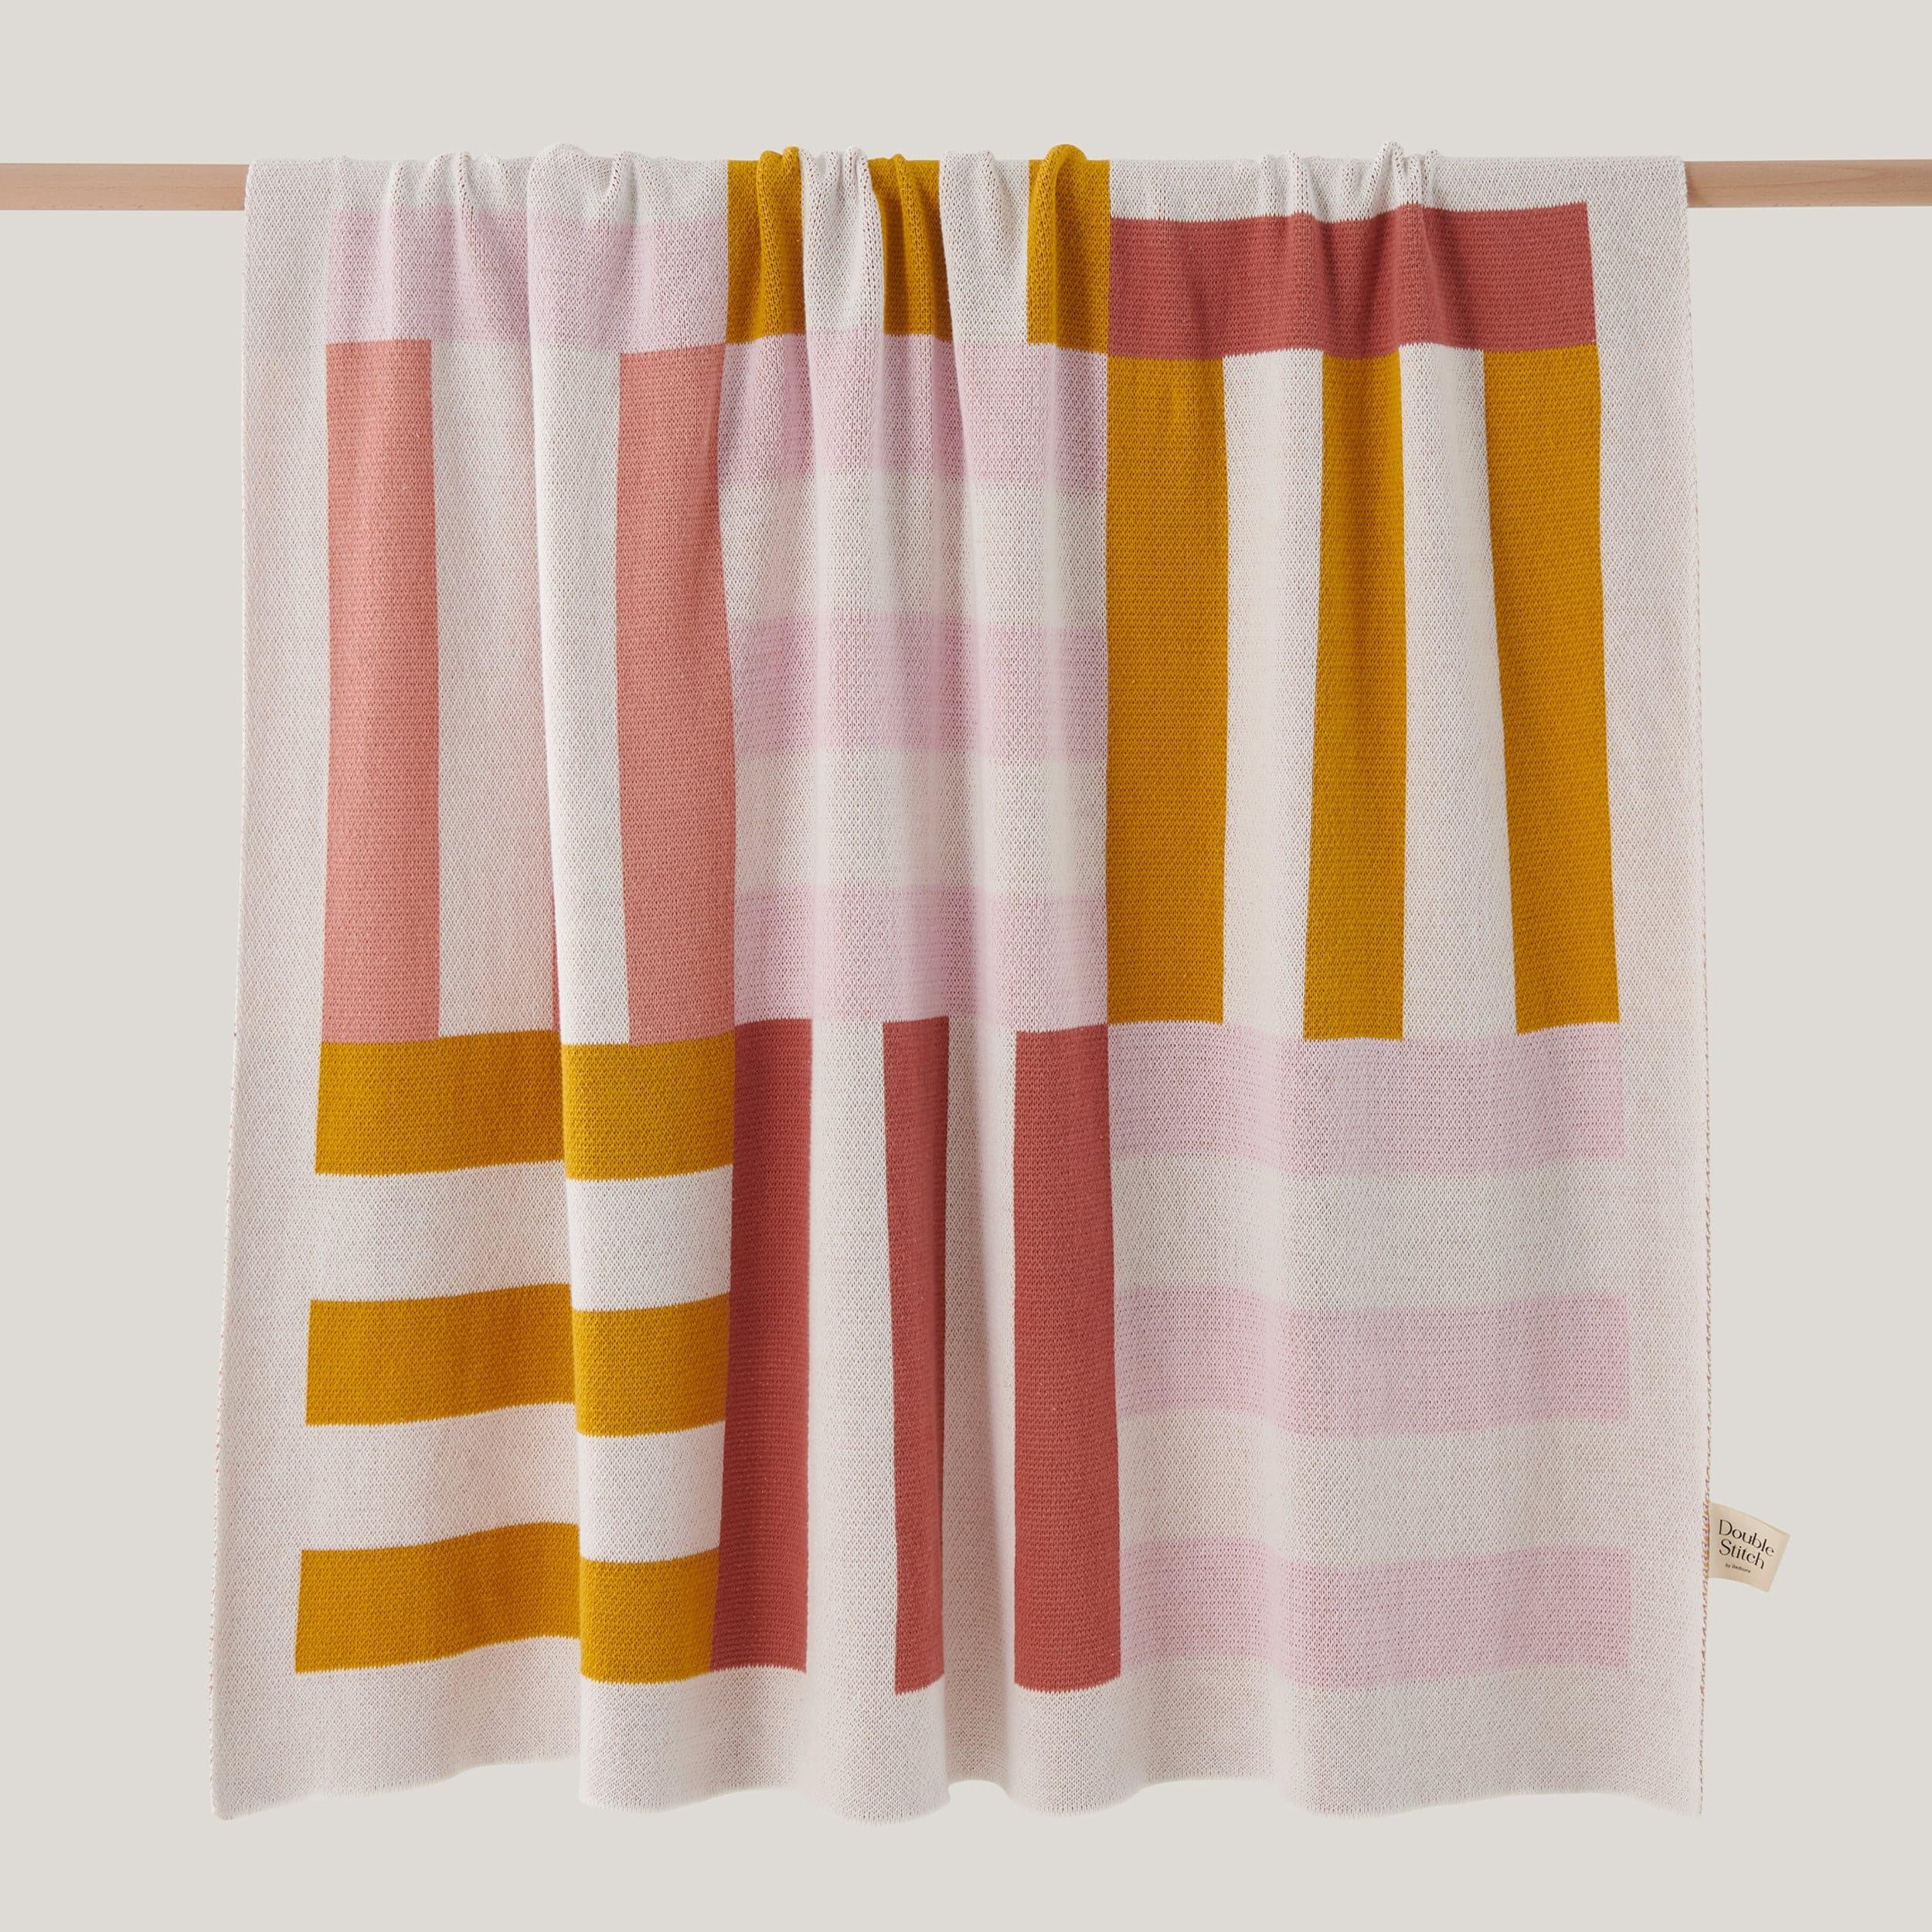 The cotton throw blanket with Intarsia knit design is a cozy and stylish addition to your home.